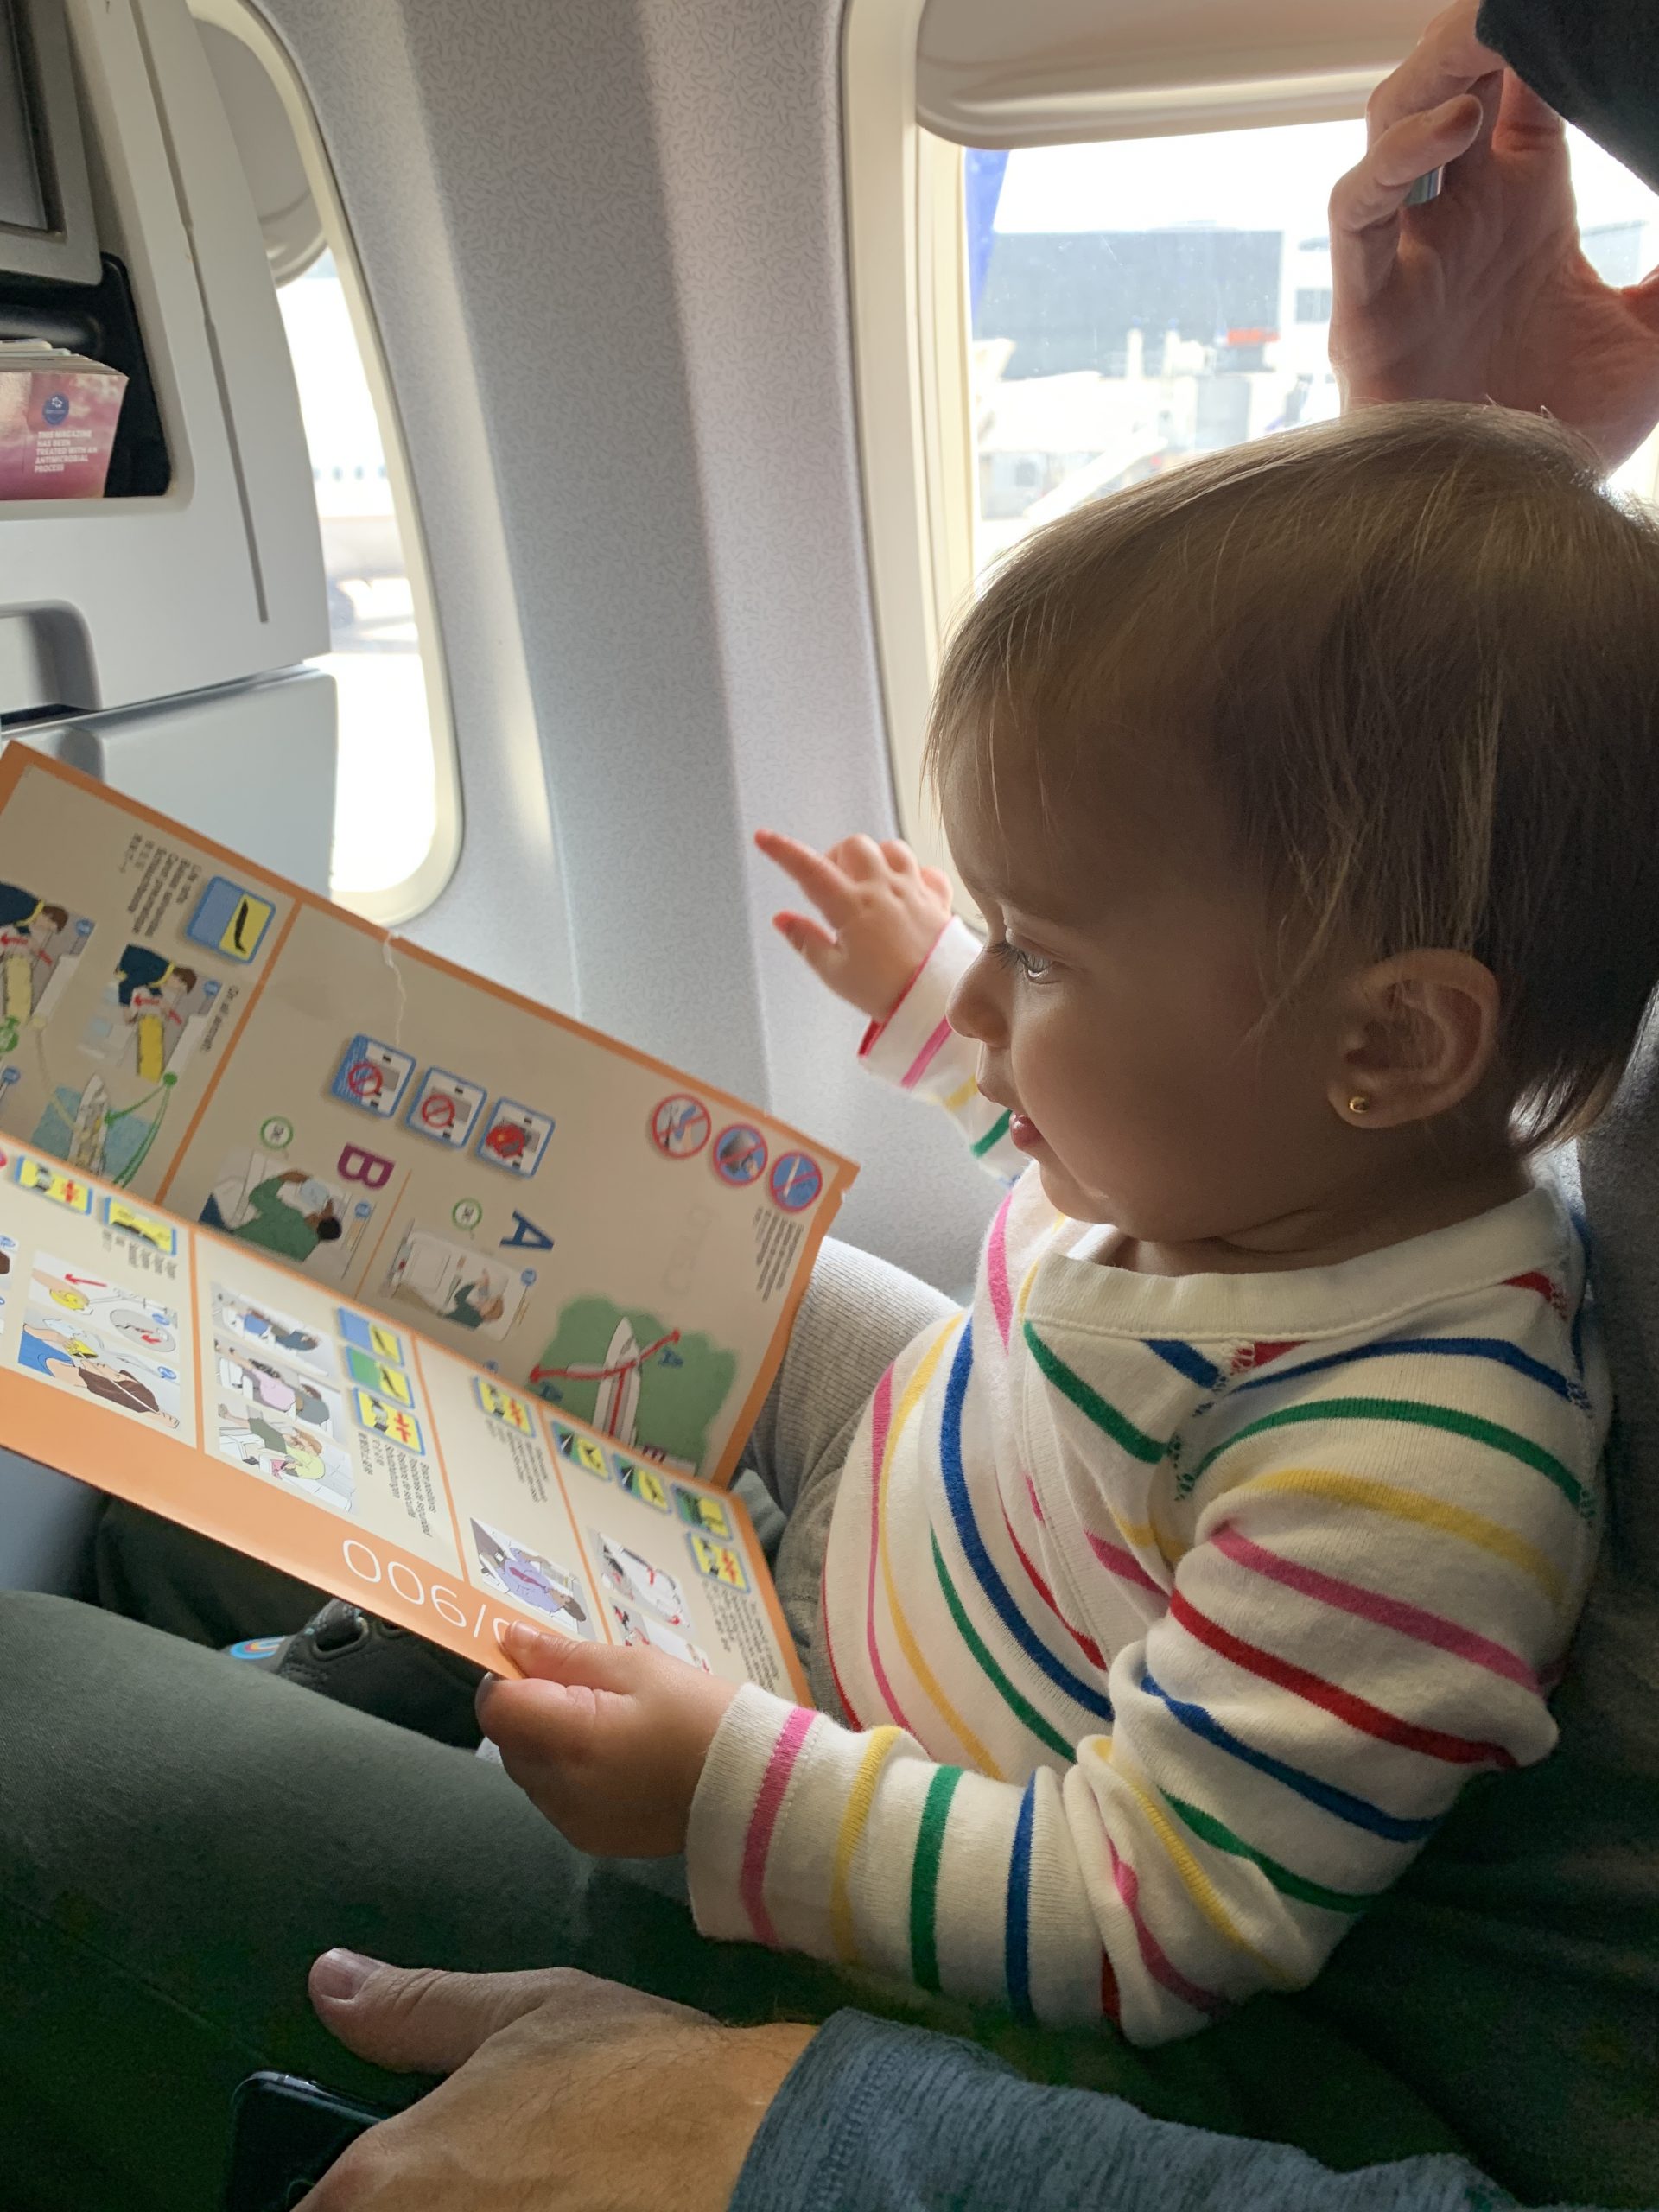 A toddler sitting on a parent's lap on an airplane and looking at a flight instruction pamphlet.